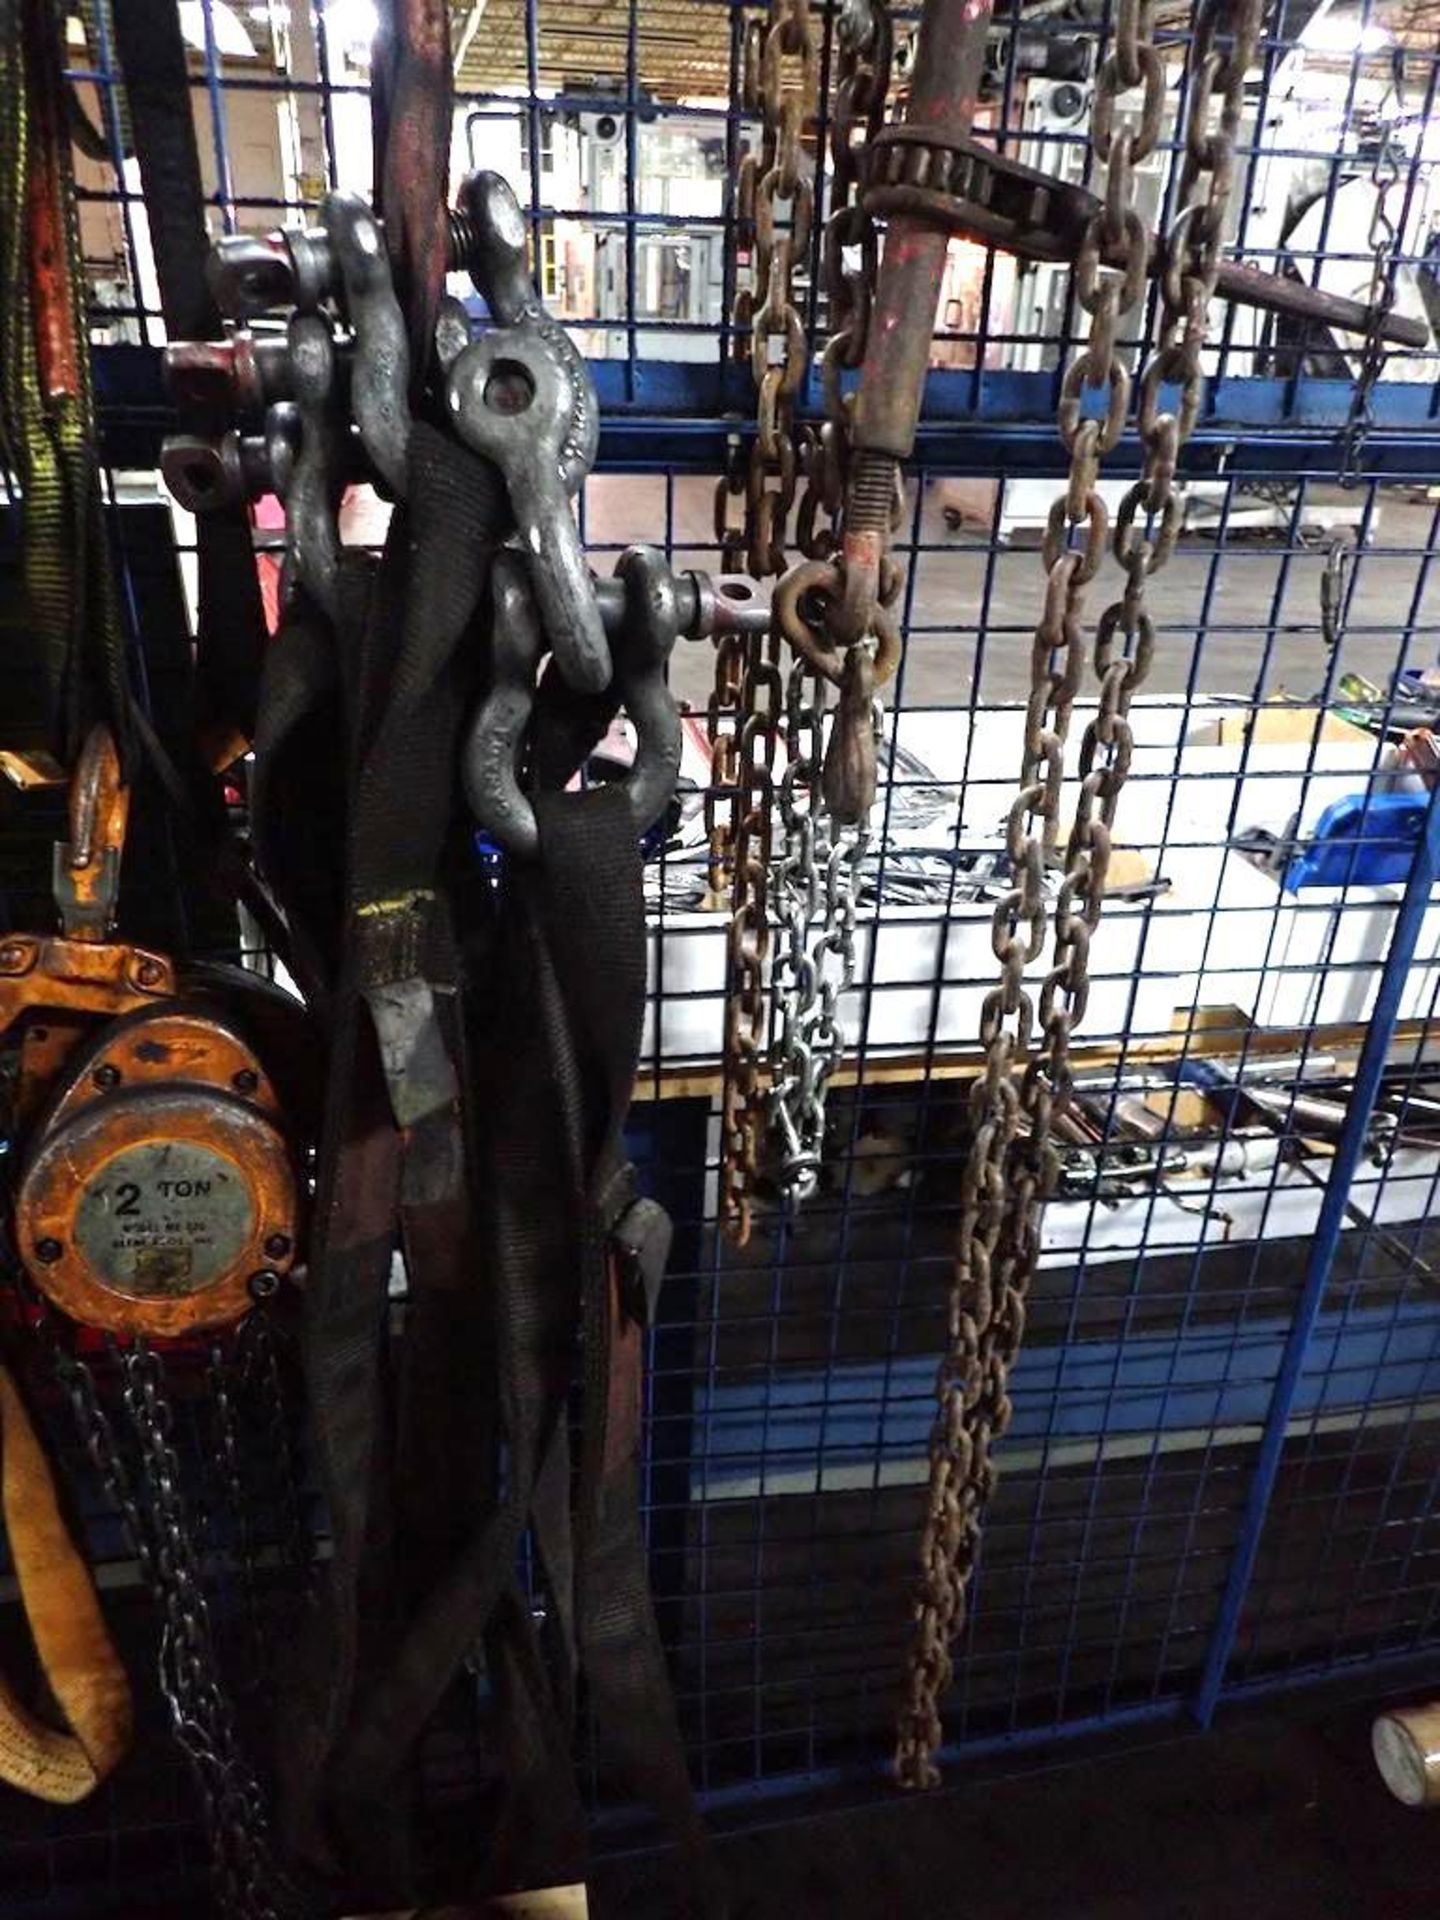 LOT MOD. ZCS-3 3-TON HANG SCALE, 2-TON CHAIN HOIST W/CHAINS & SLINGS - Image 4 of 6